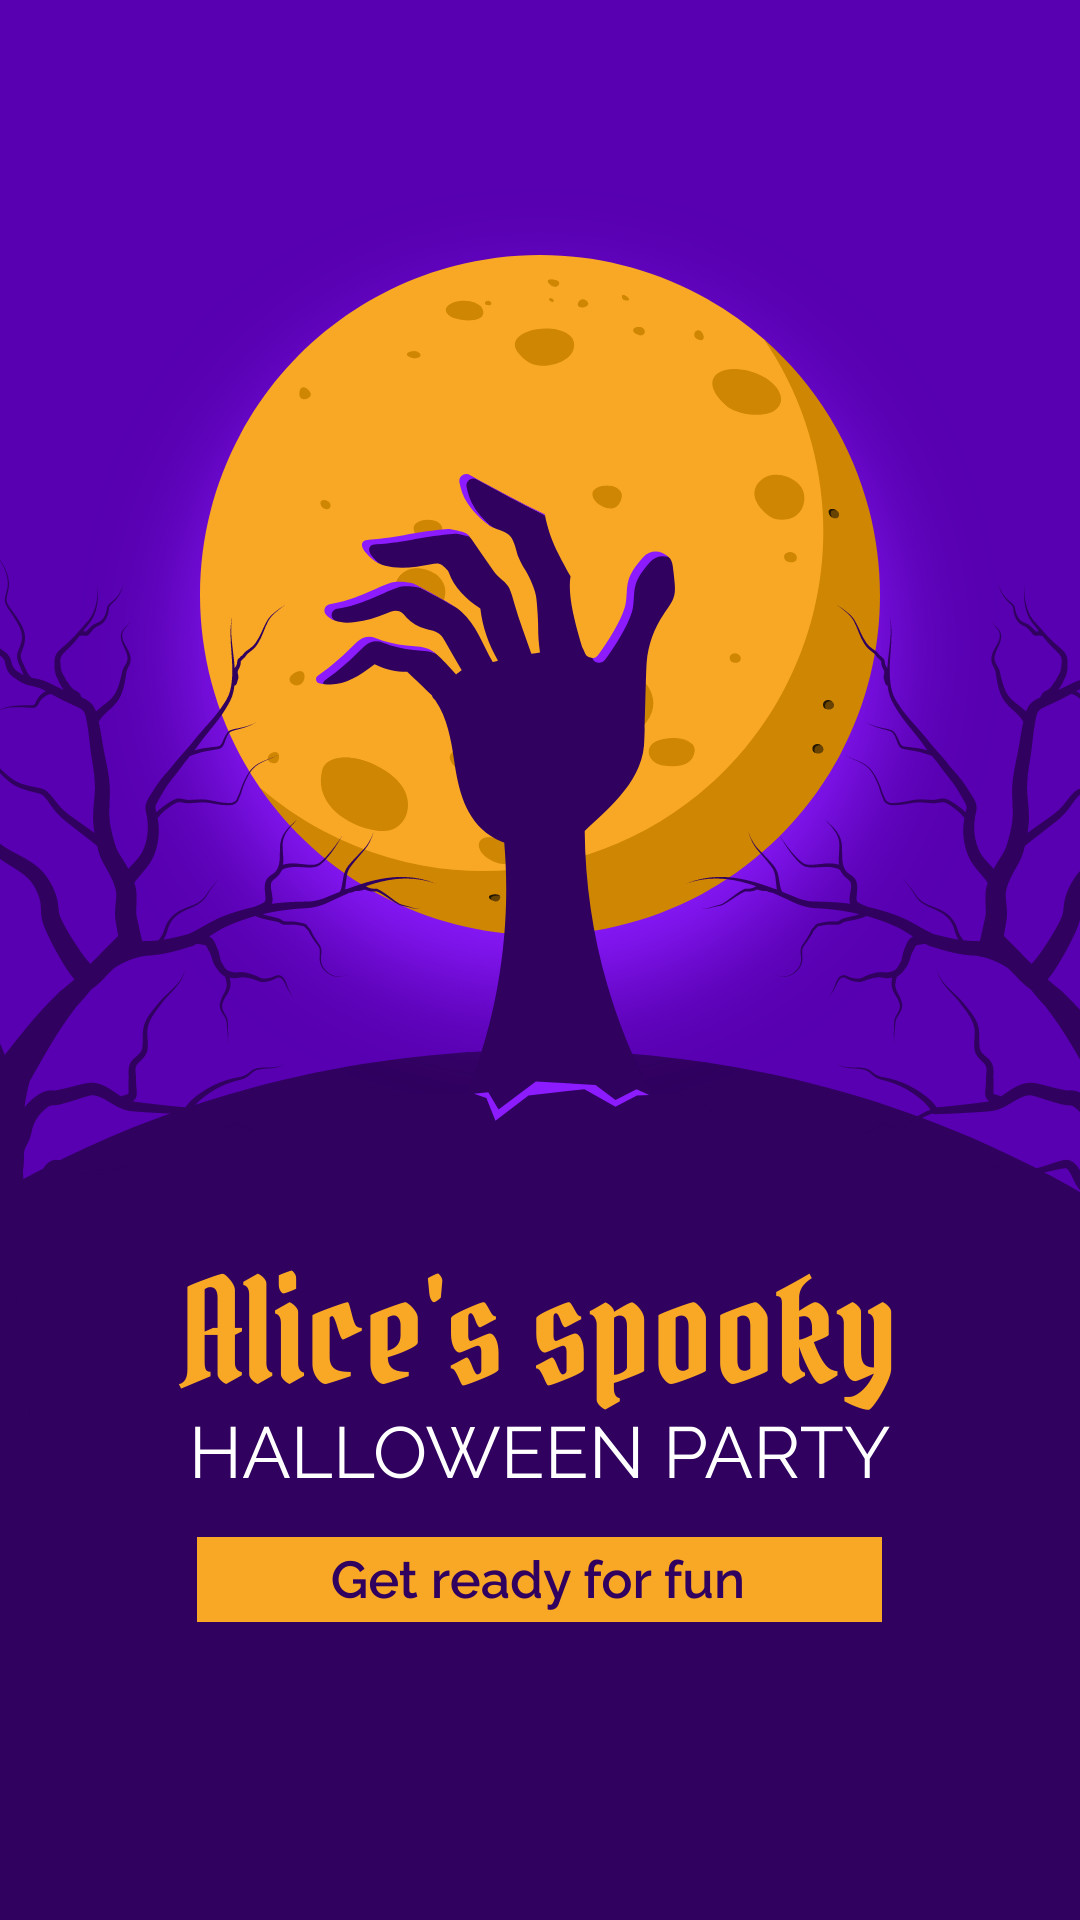 Halloween Party Ad Template Facebook Cover 820x360